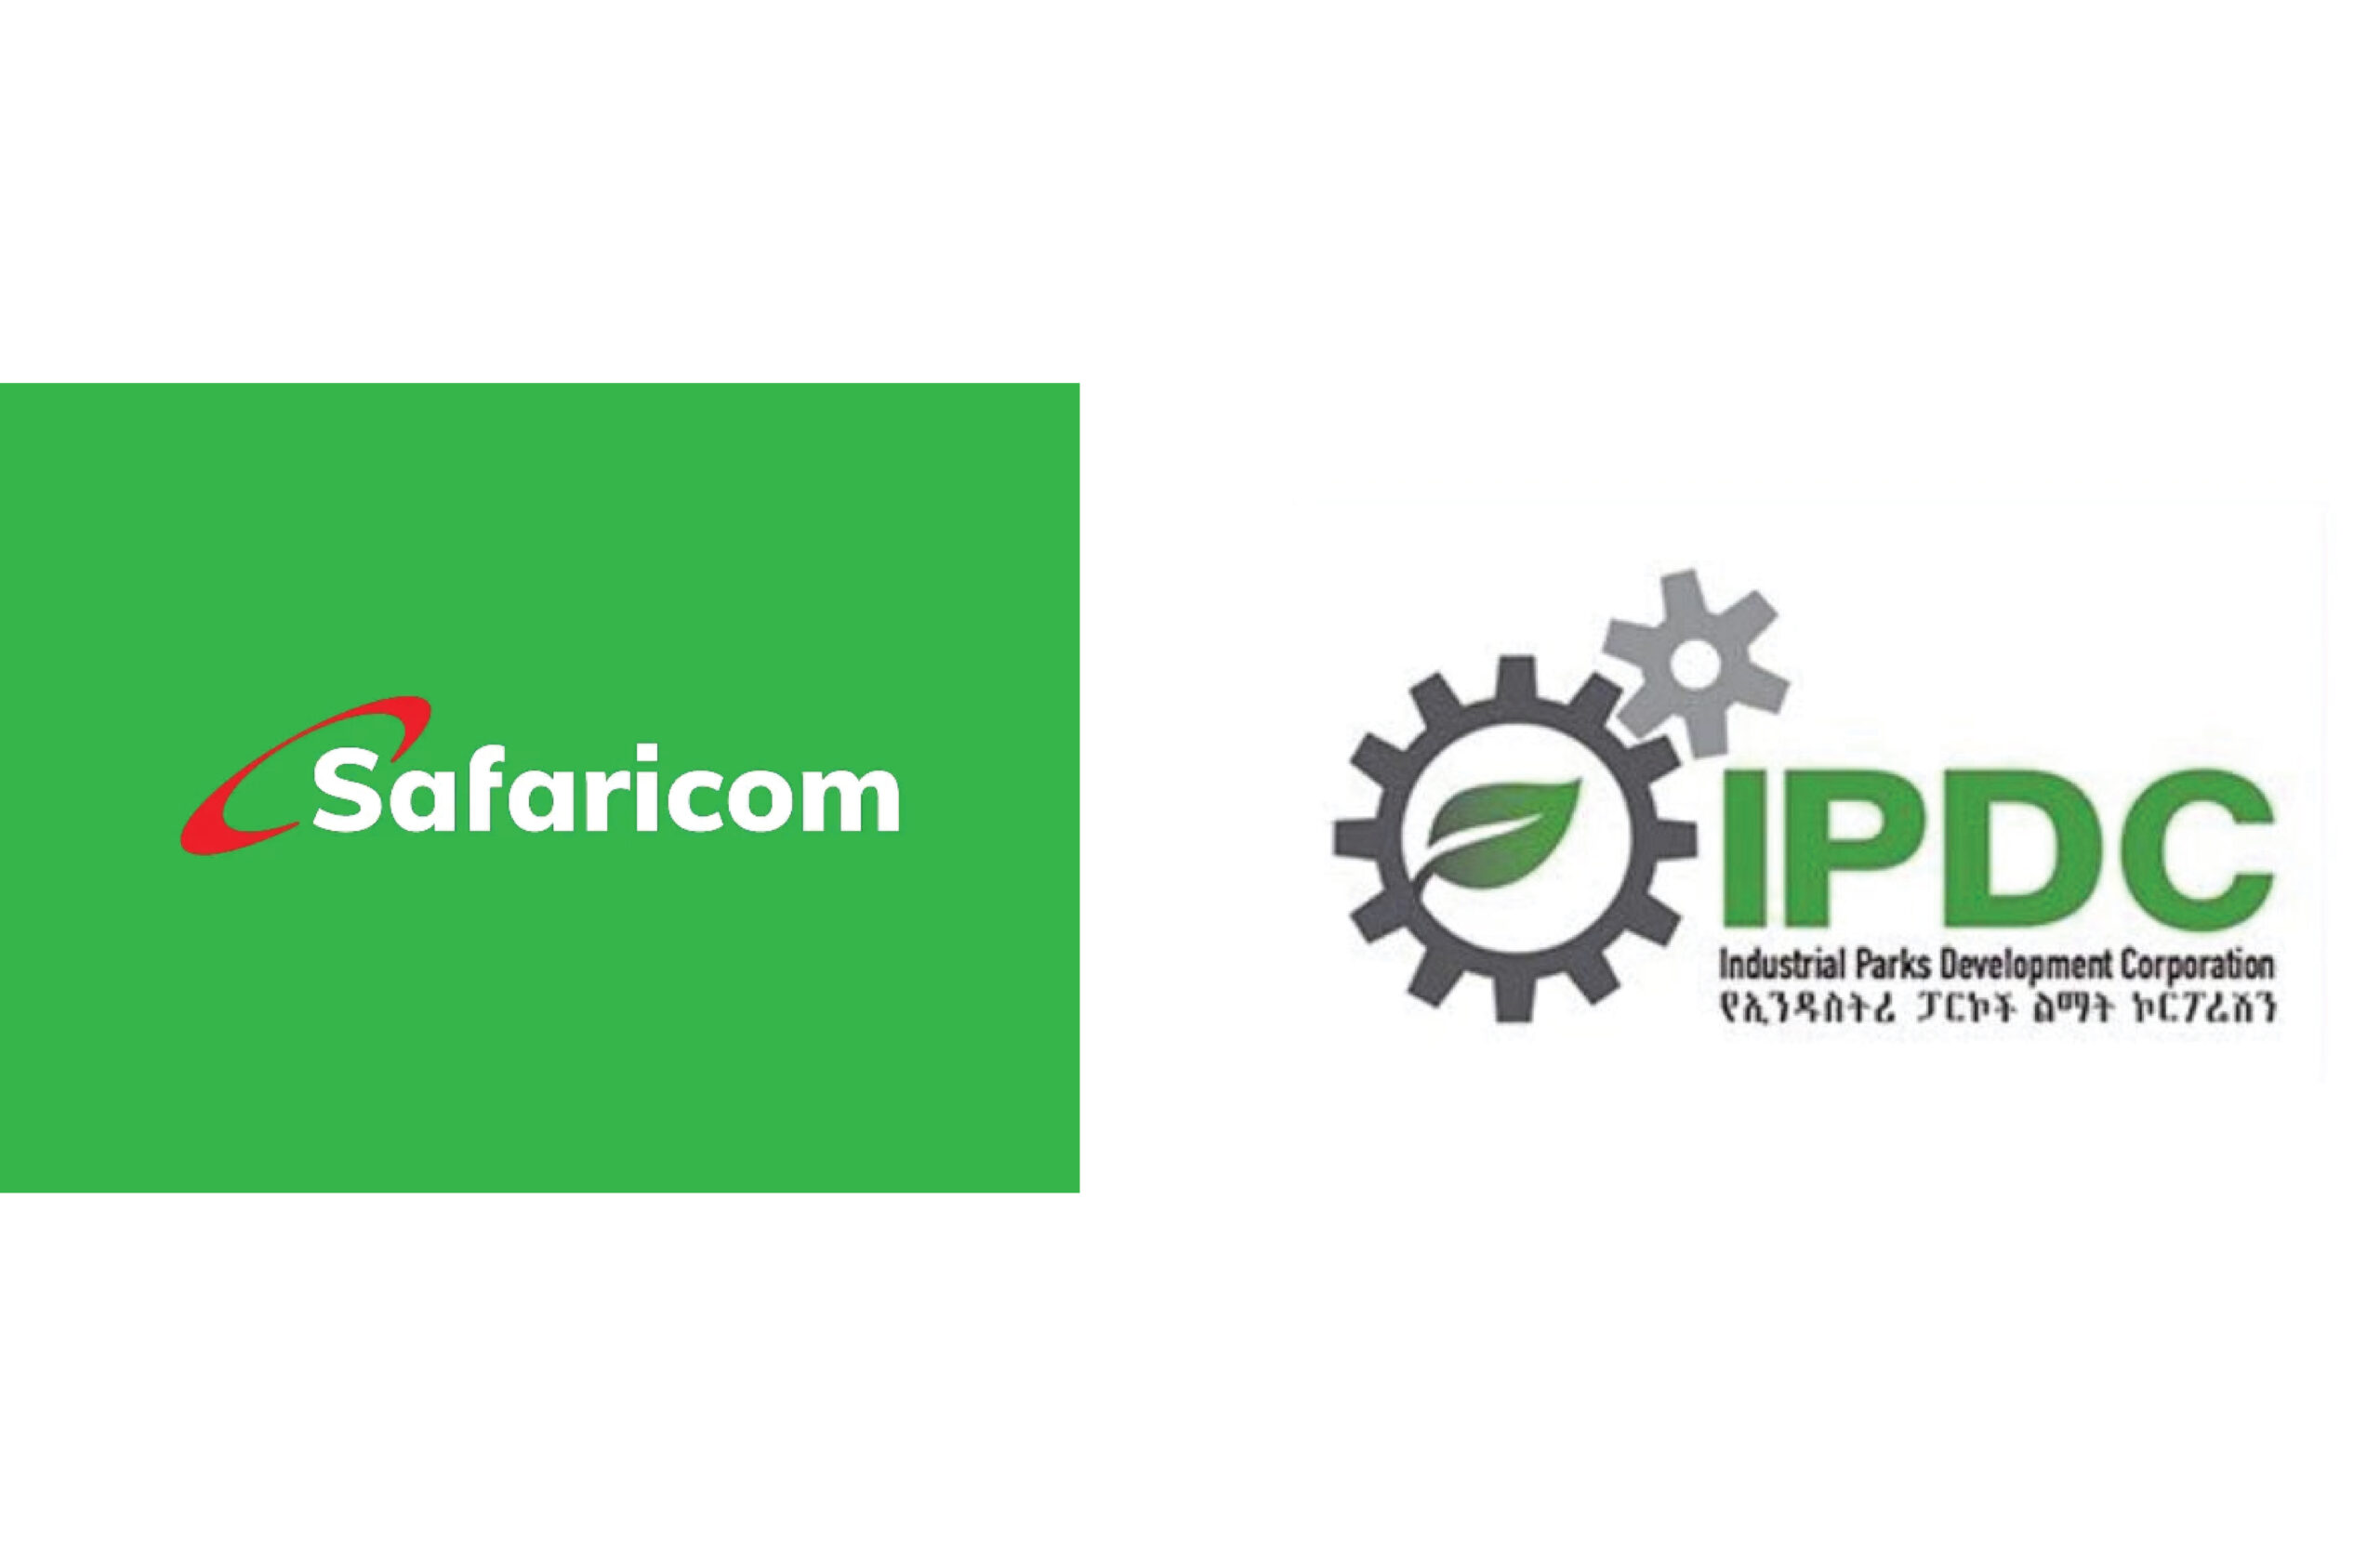 Safaricom, IPDC Signed an Industrial Land Leasing Agreement